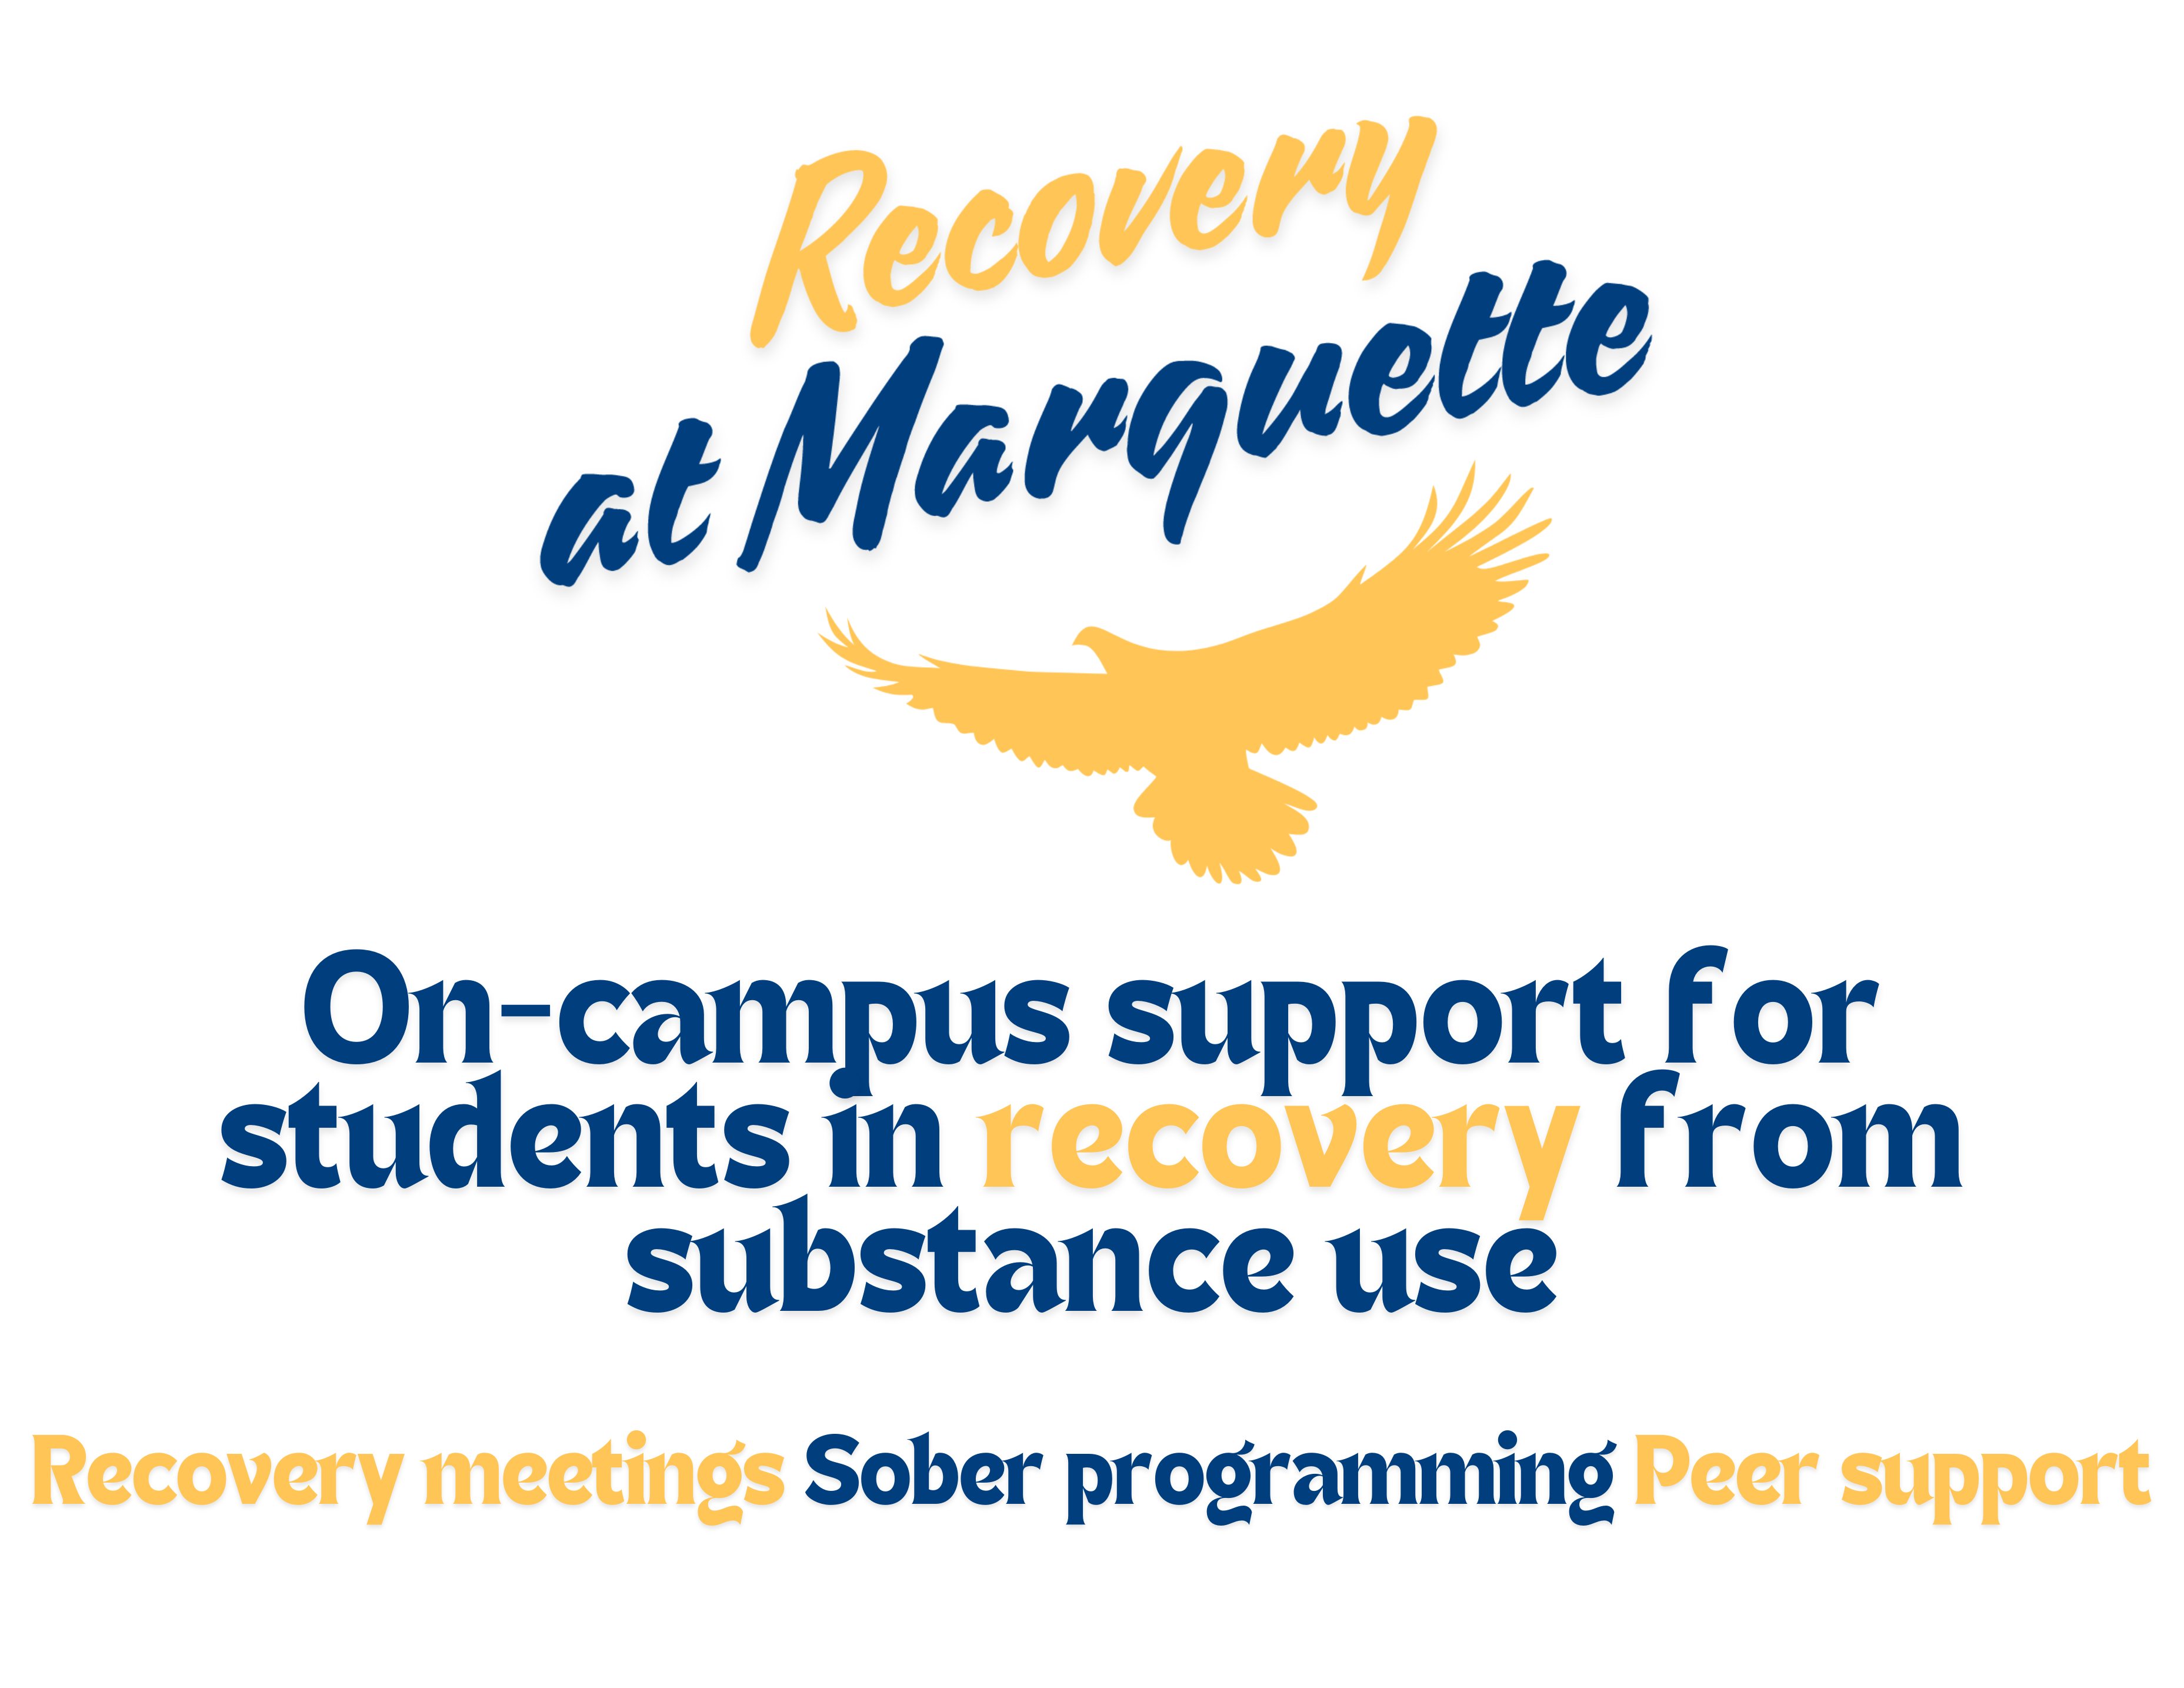 Recovery at Marquette promo